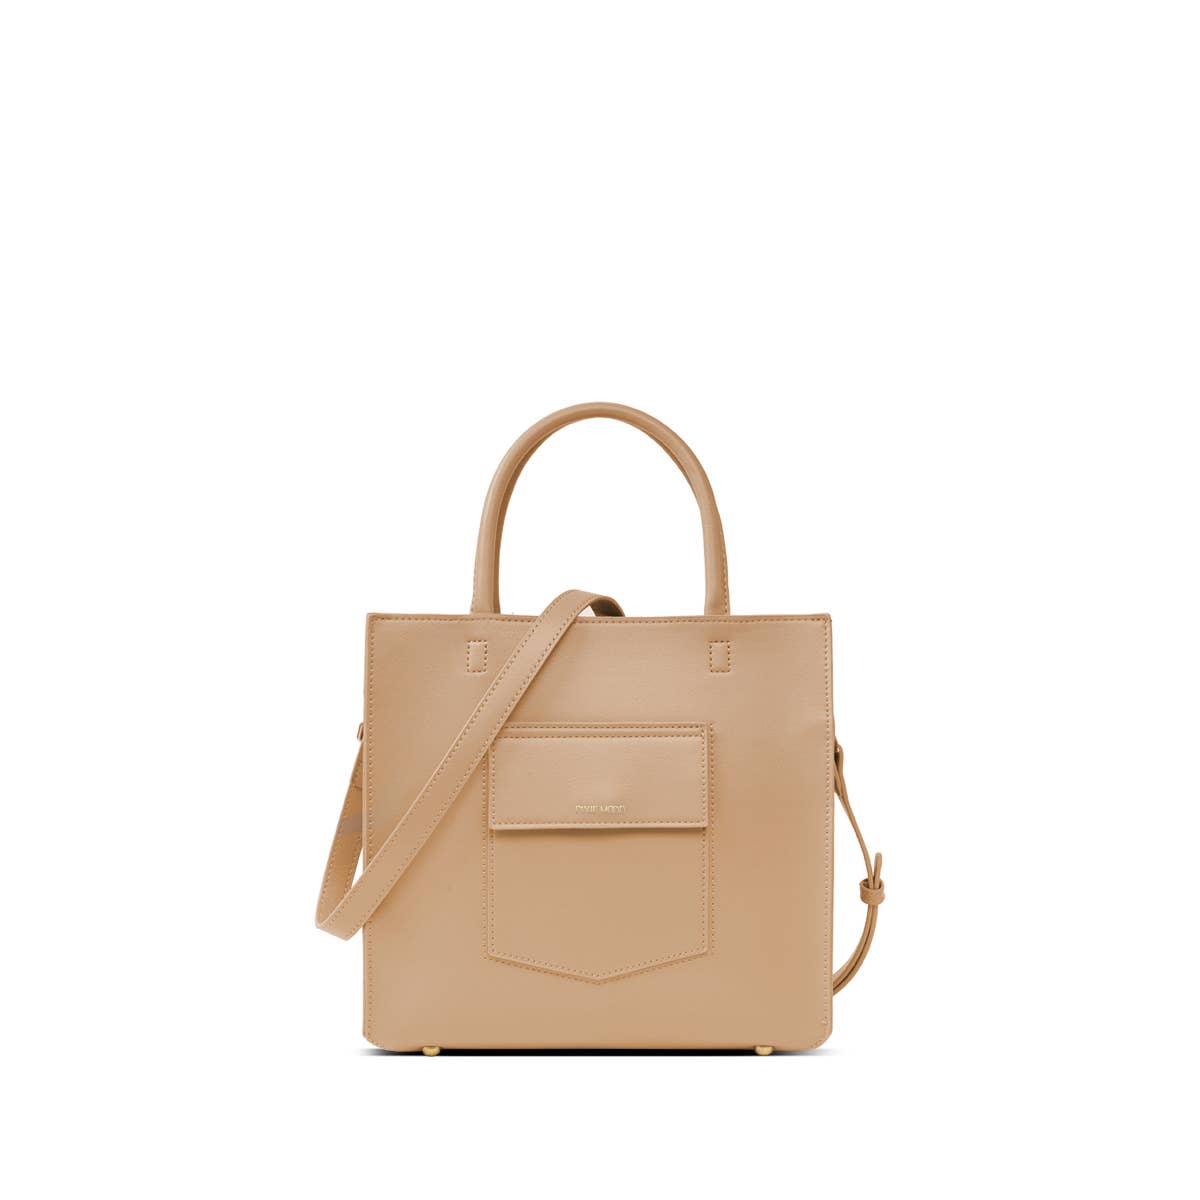 Caitlin tote small